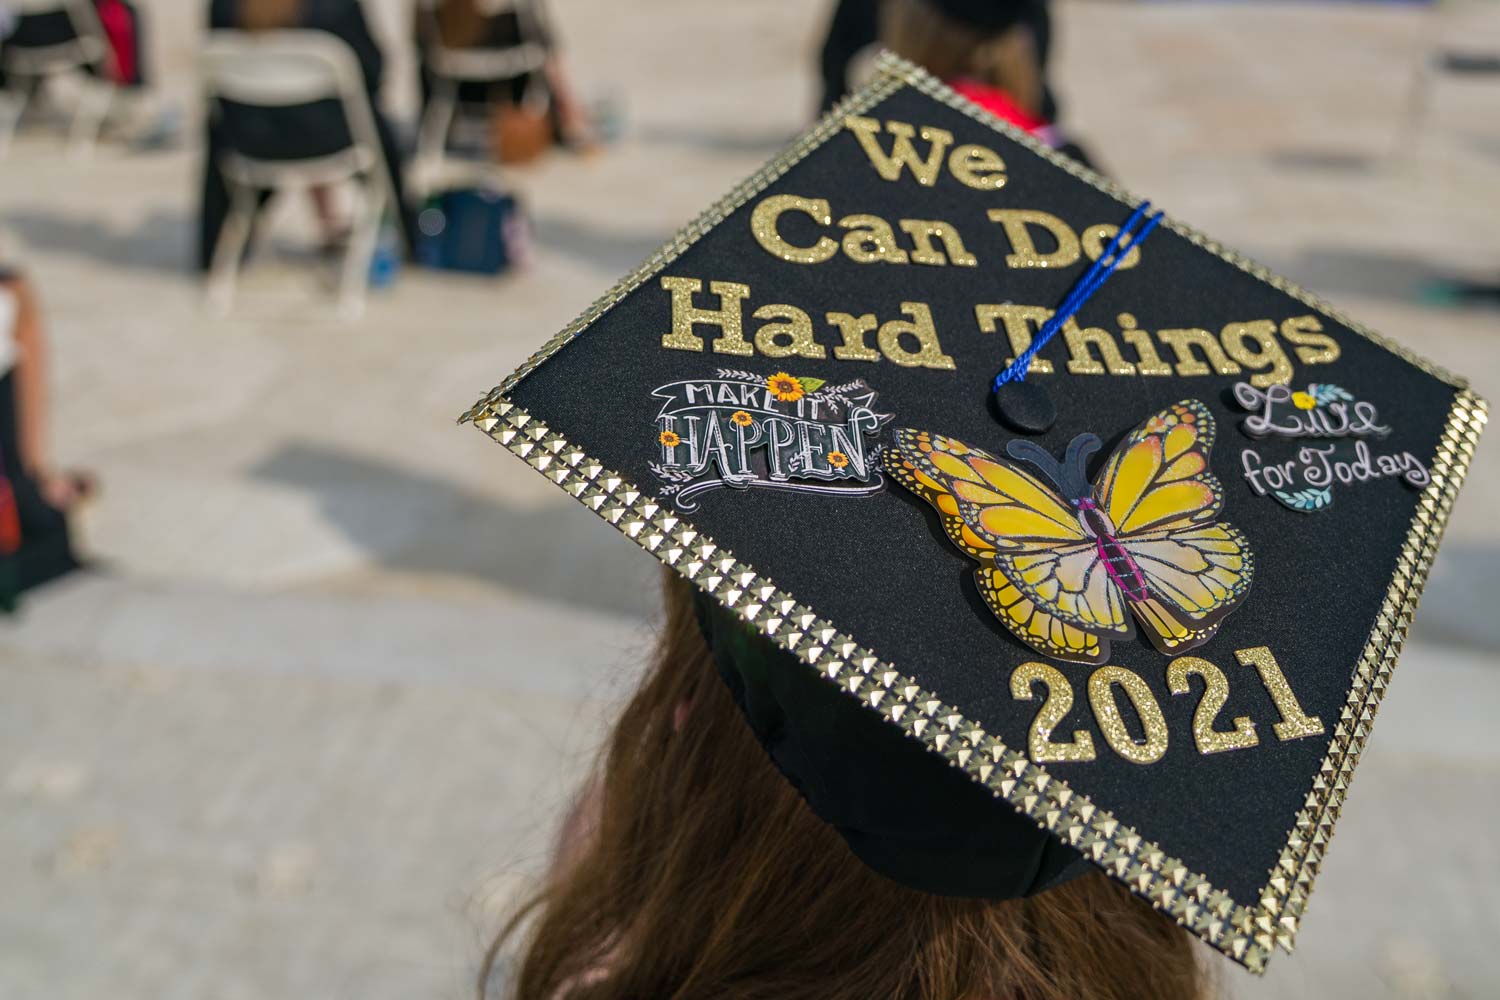 A graduation cap that reads "we can do hard things" in gold lettering with a butterfly and motivational stickers